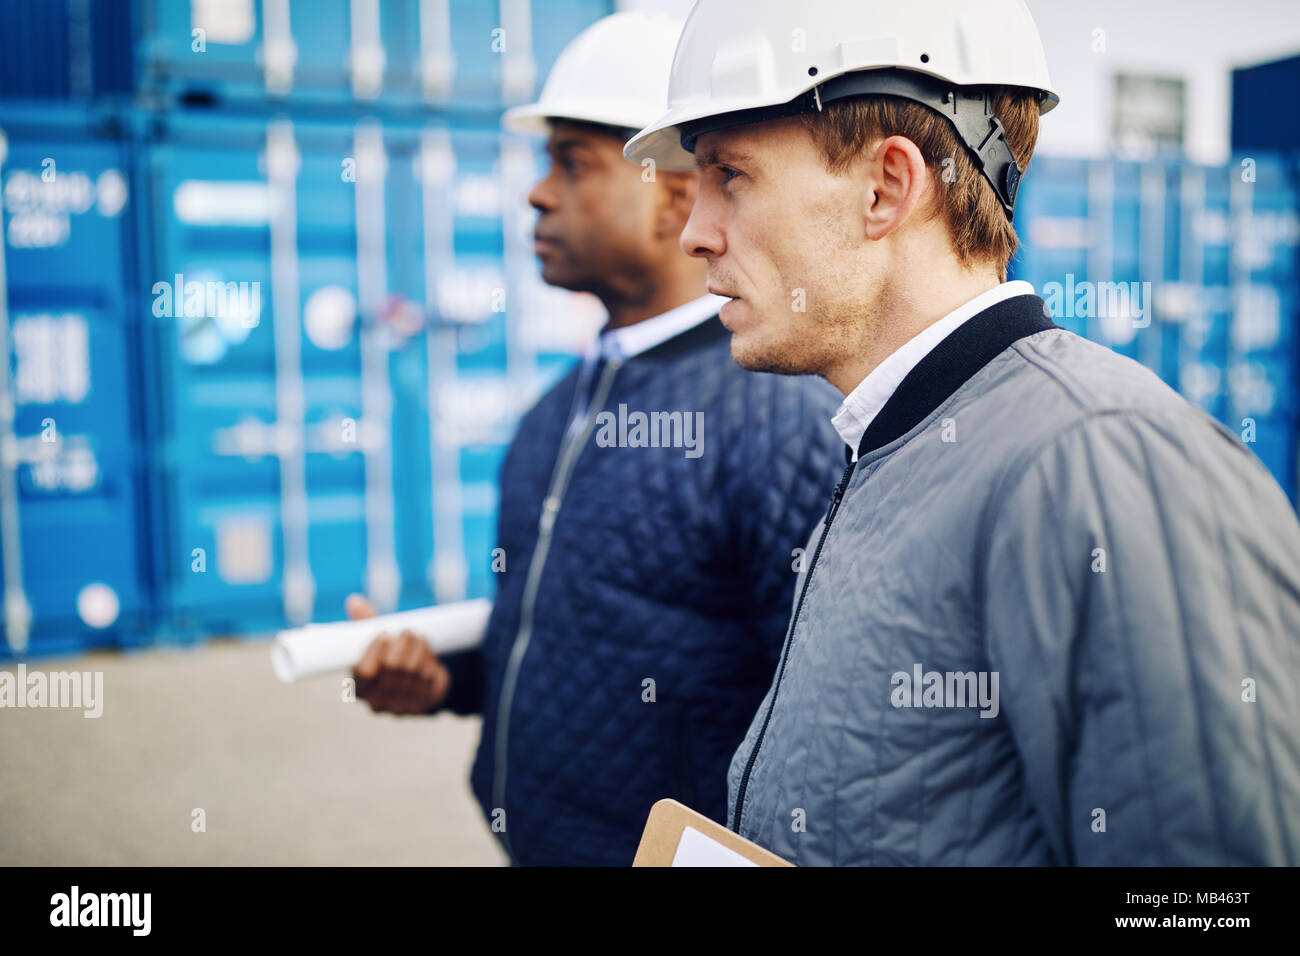 Two engineers wearing hardhats standing together by freight containers on a large commercial shipping dock Stock Photo